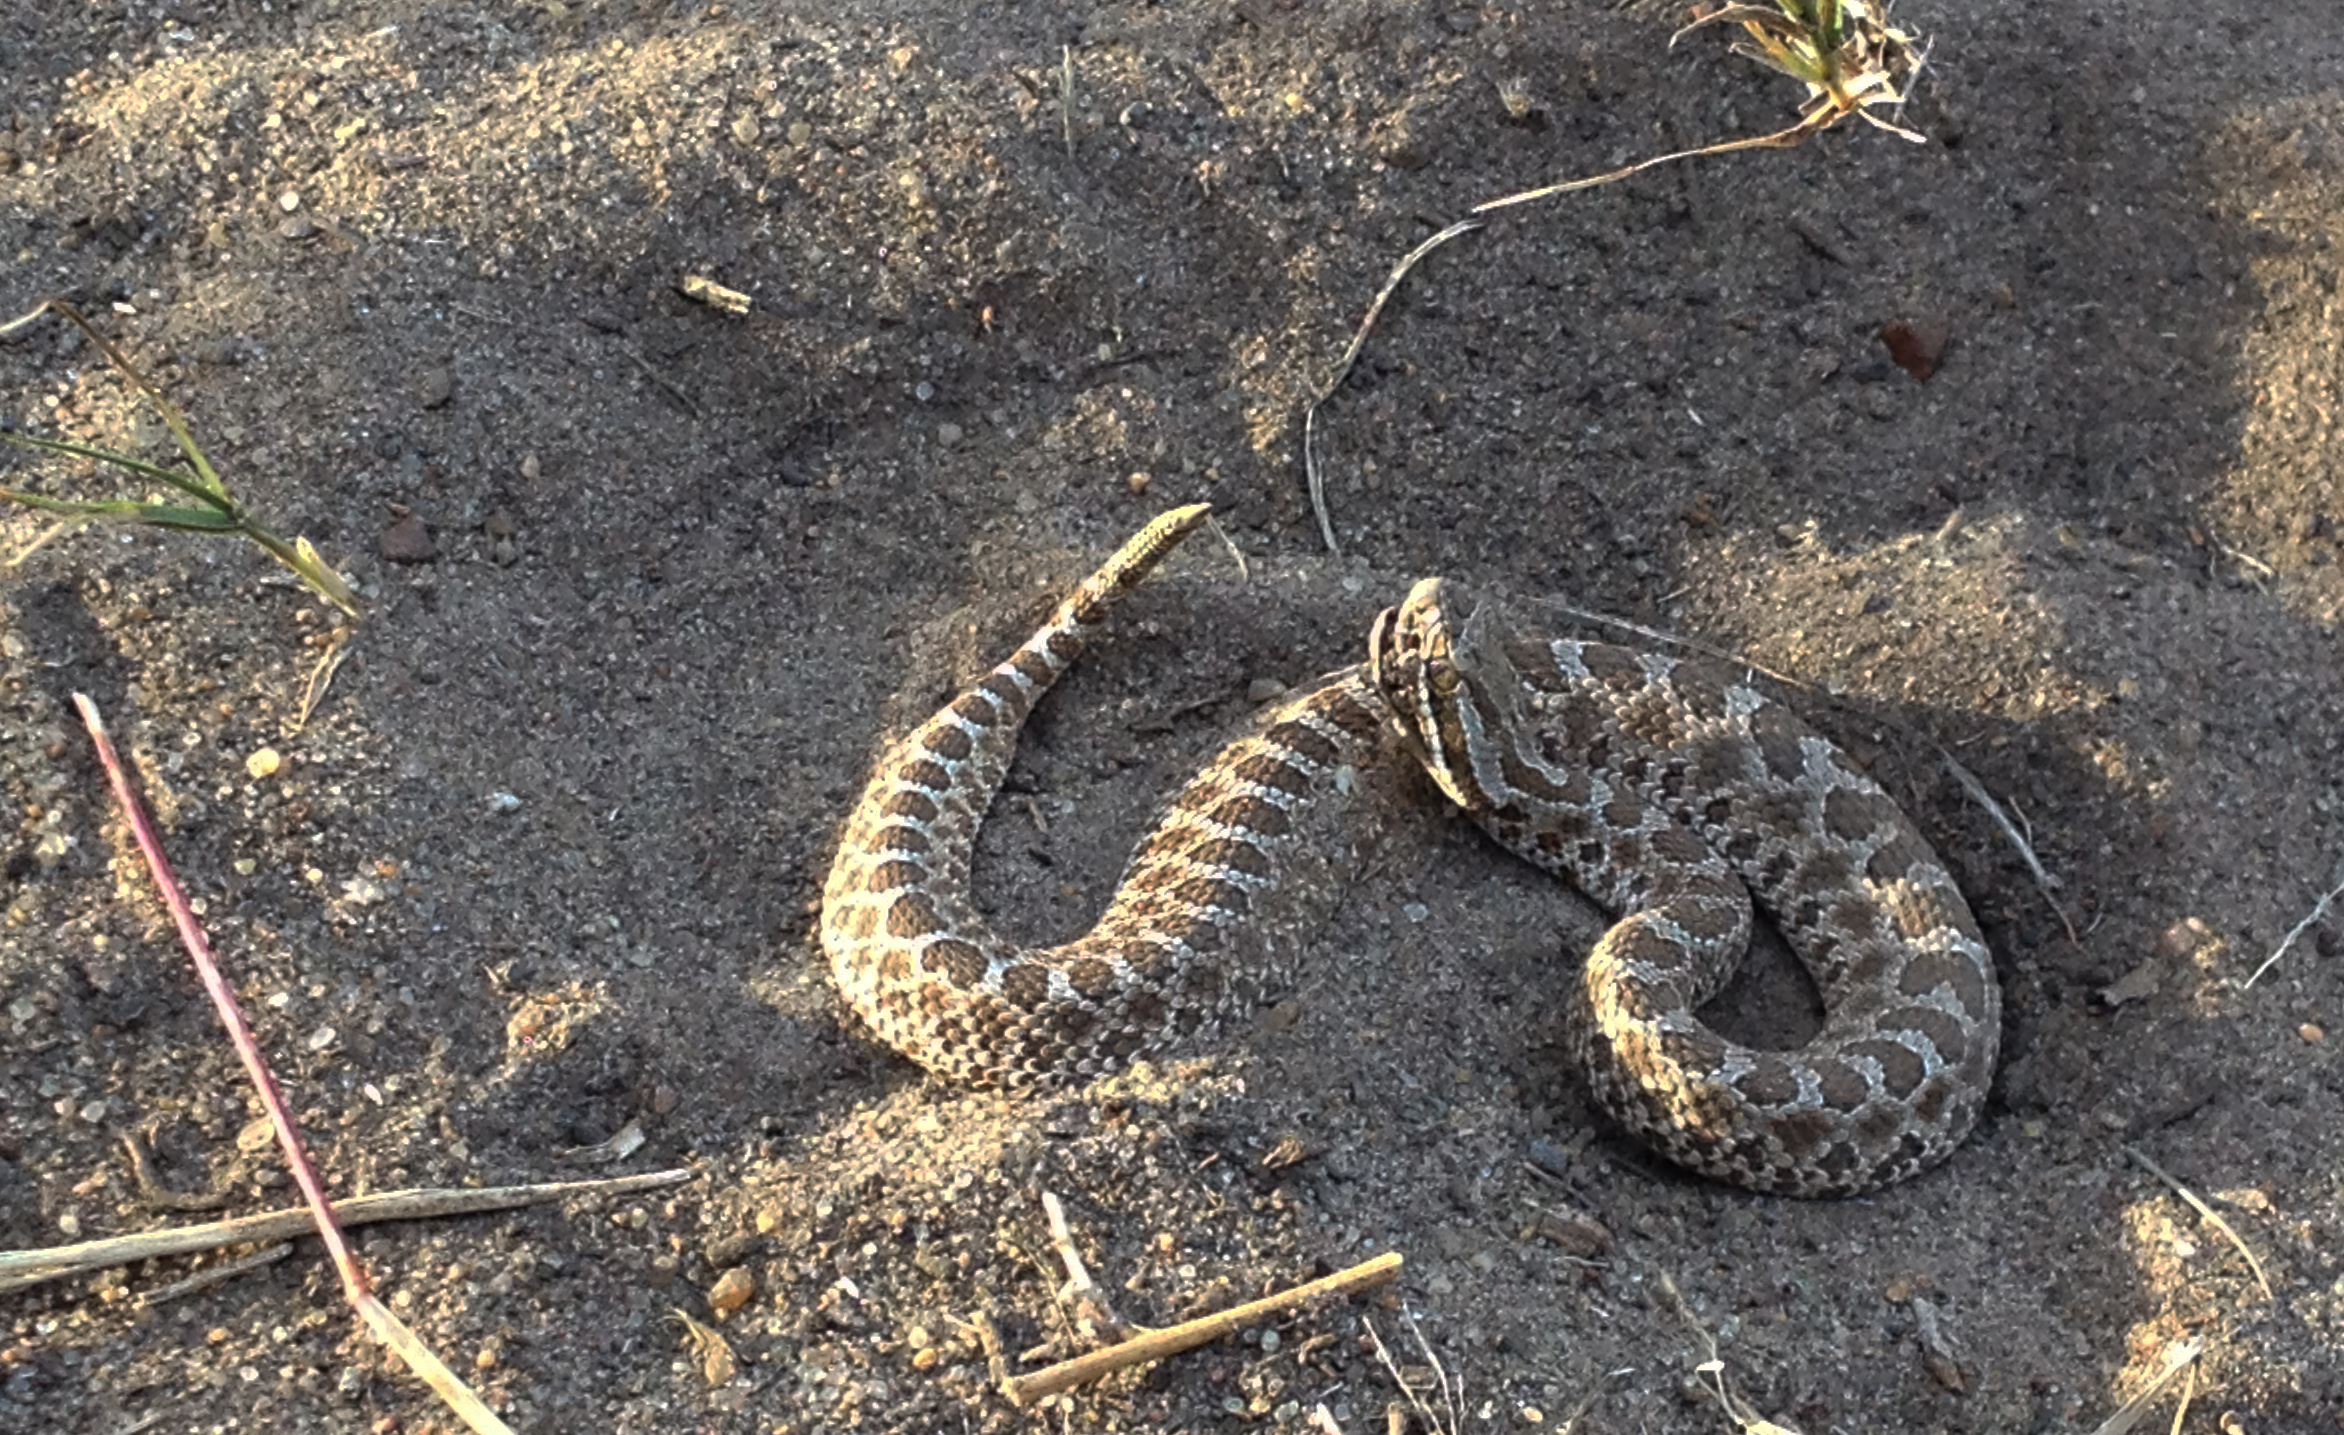 Snake Spotting - What to Look For When Identifying Venomous Snakes